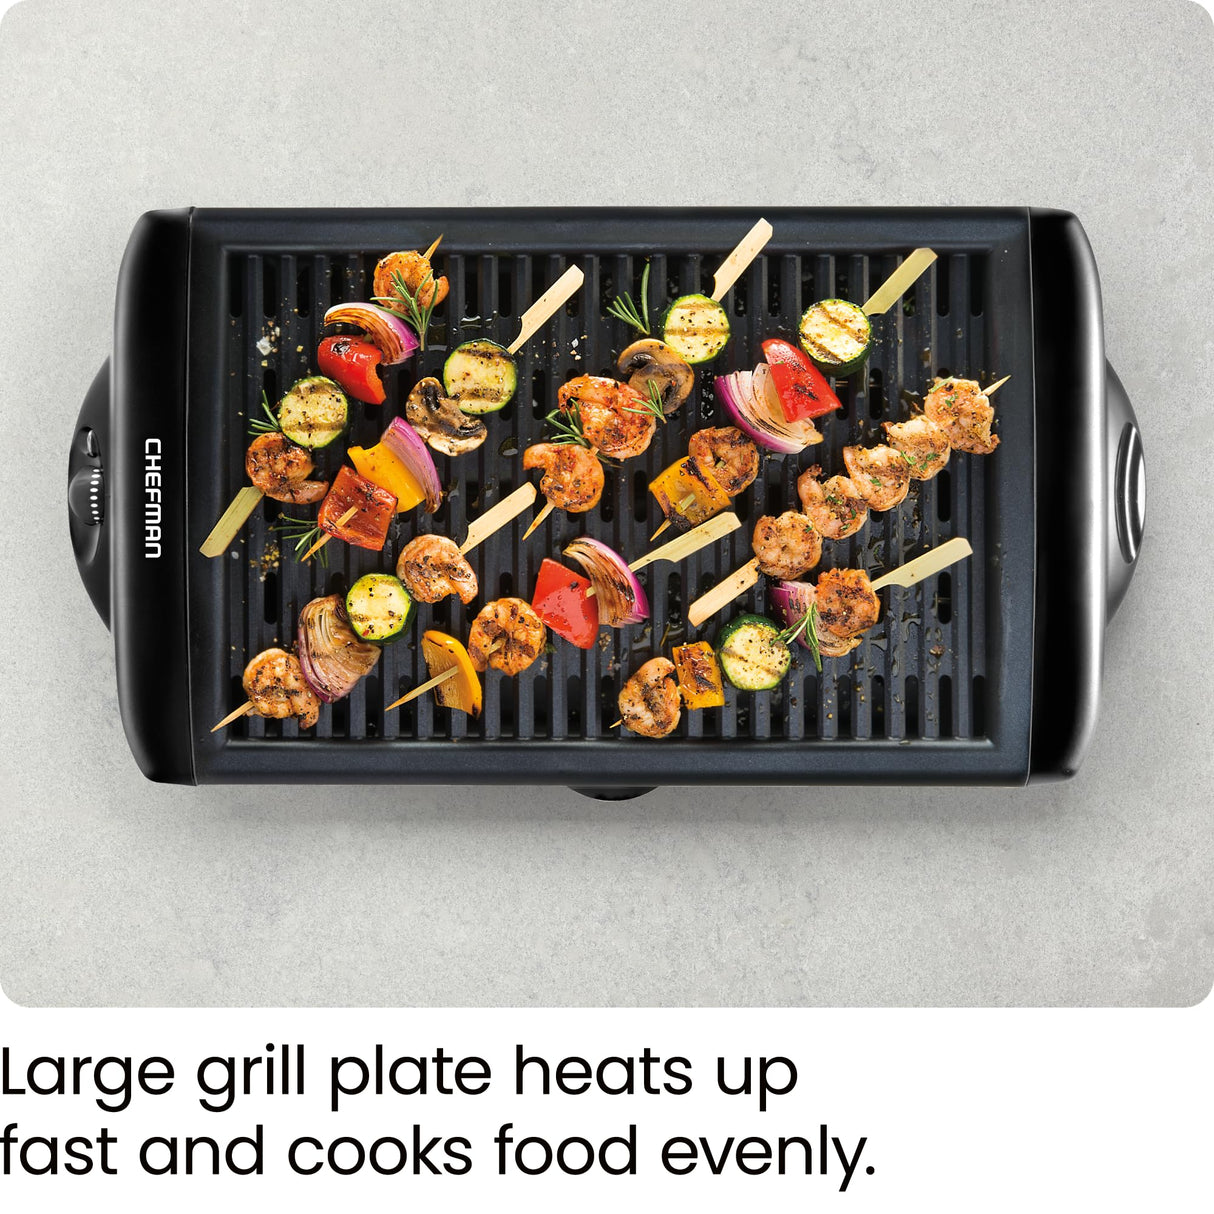 Chefman Electric Smokeless Indoor Grill w/Non-Stick Cooking Surface & Adjustable Temperature Knob from Warm to Sear for Customized BBQing, Dishwasher Safe Removable Water Tray, Black